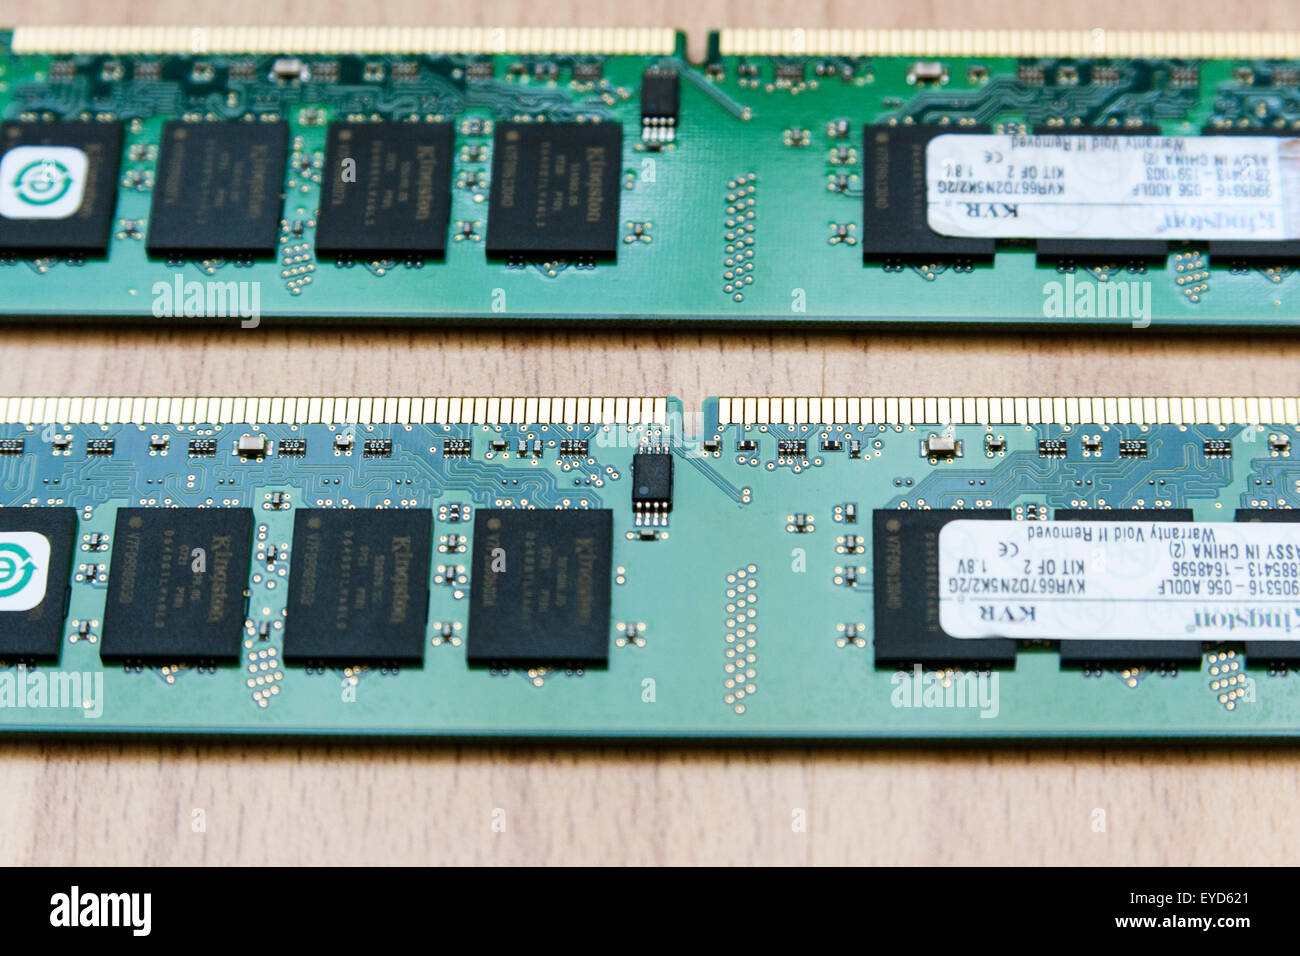 Home computer. Two green DIMM Ram sticks on wooden background. Close up showing black processors and gold coloured connection pins. Stock Photo